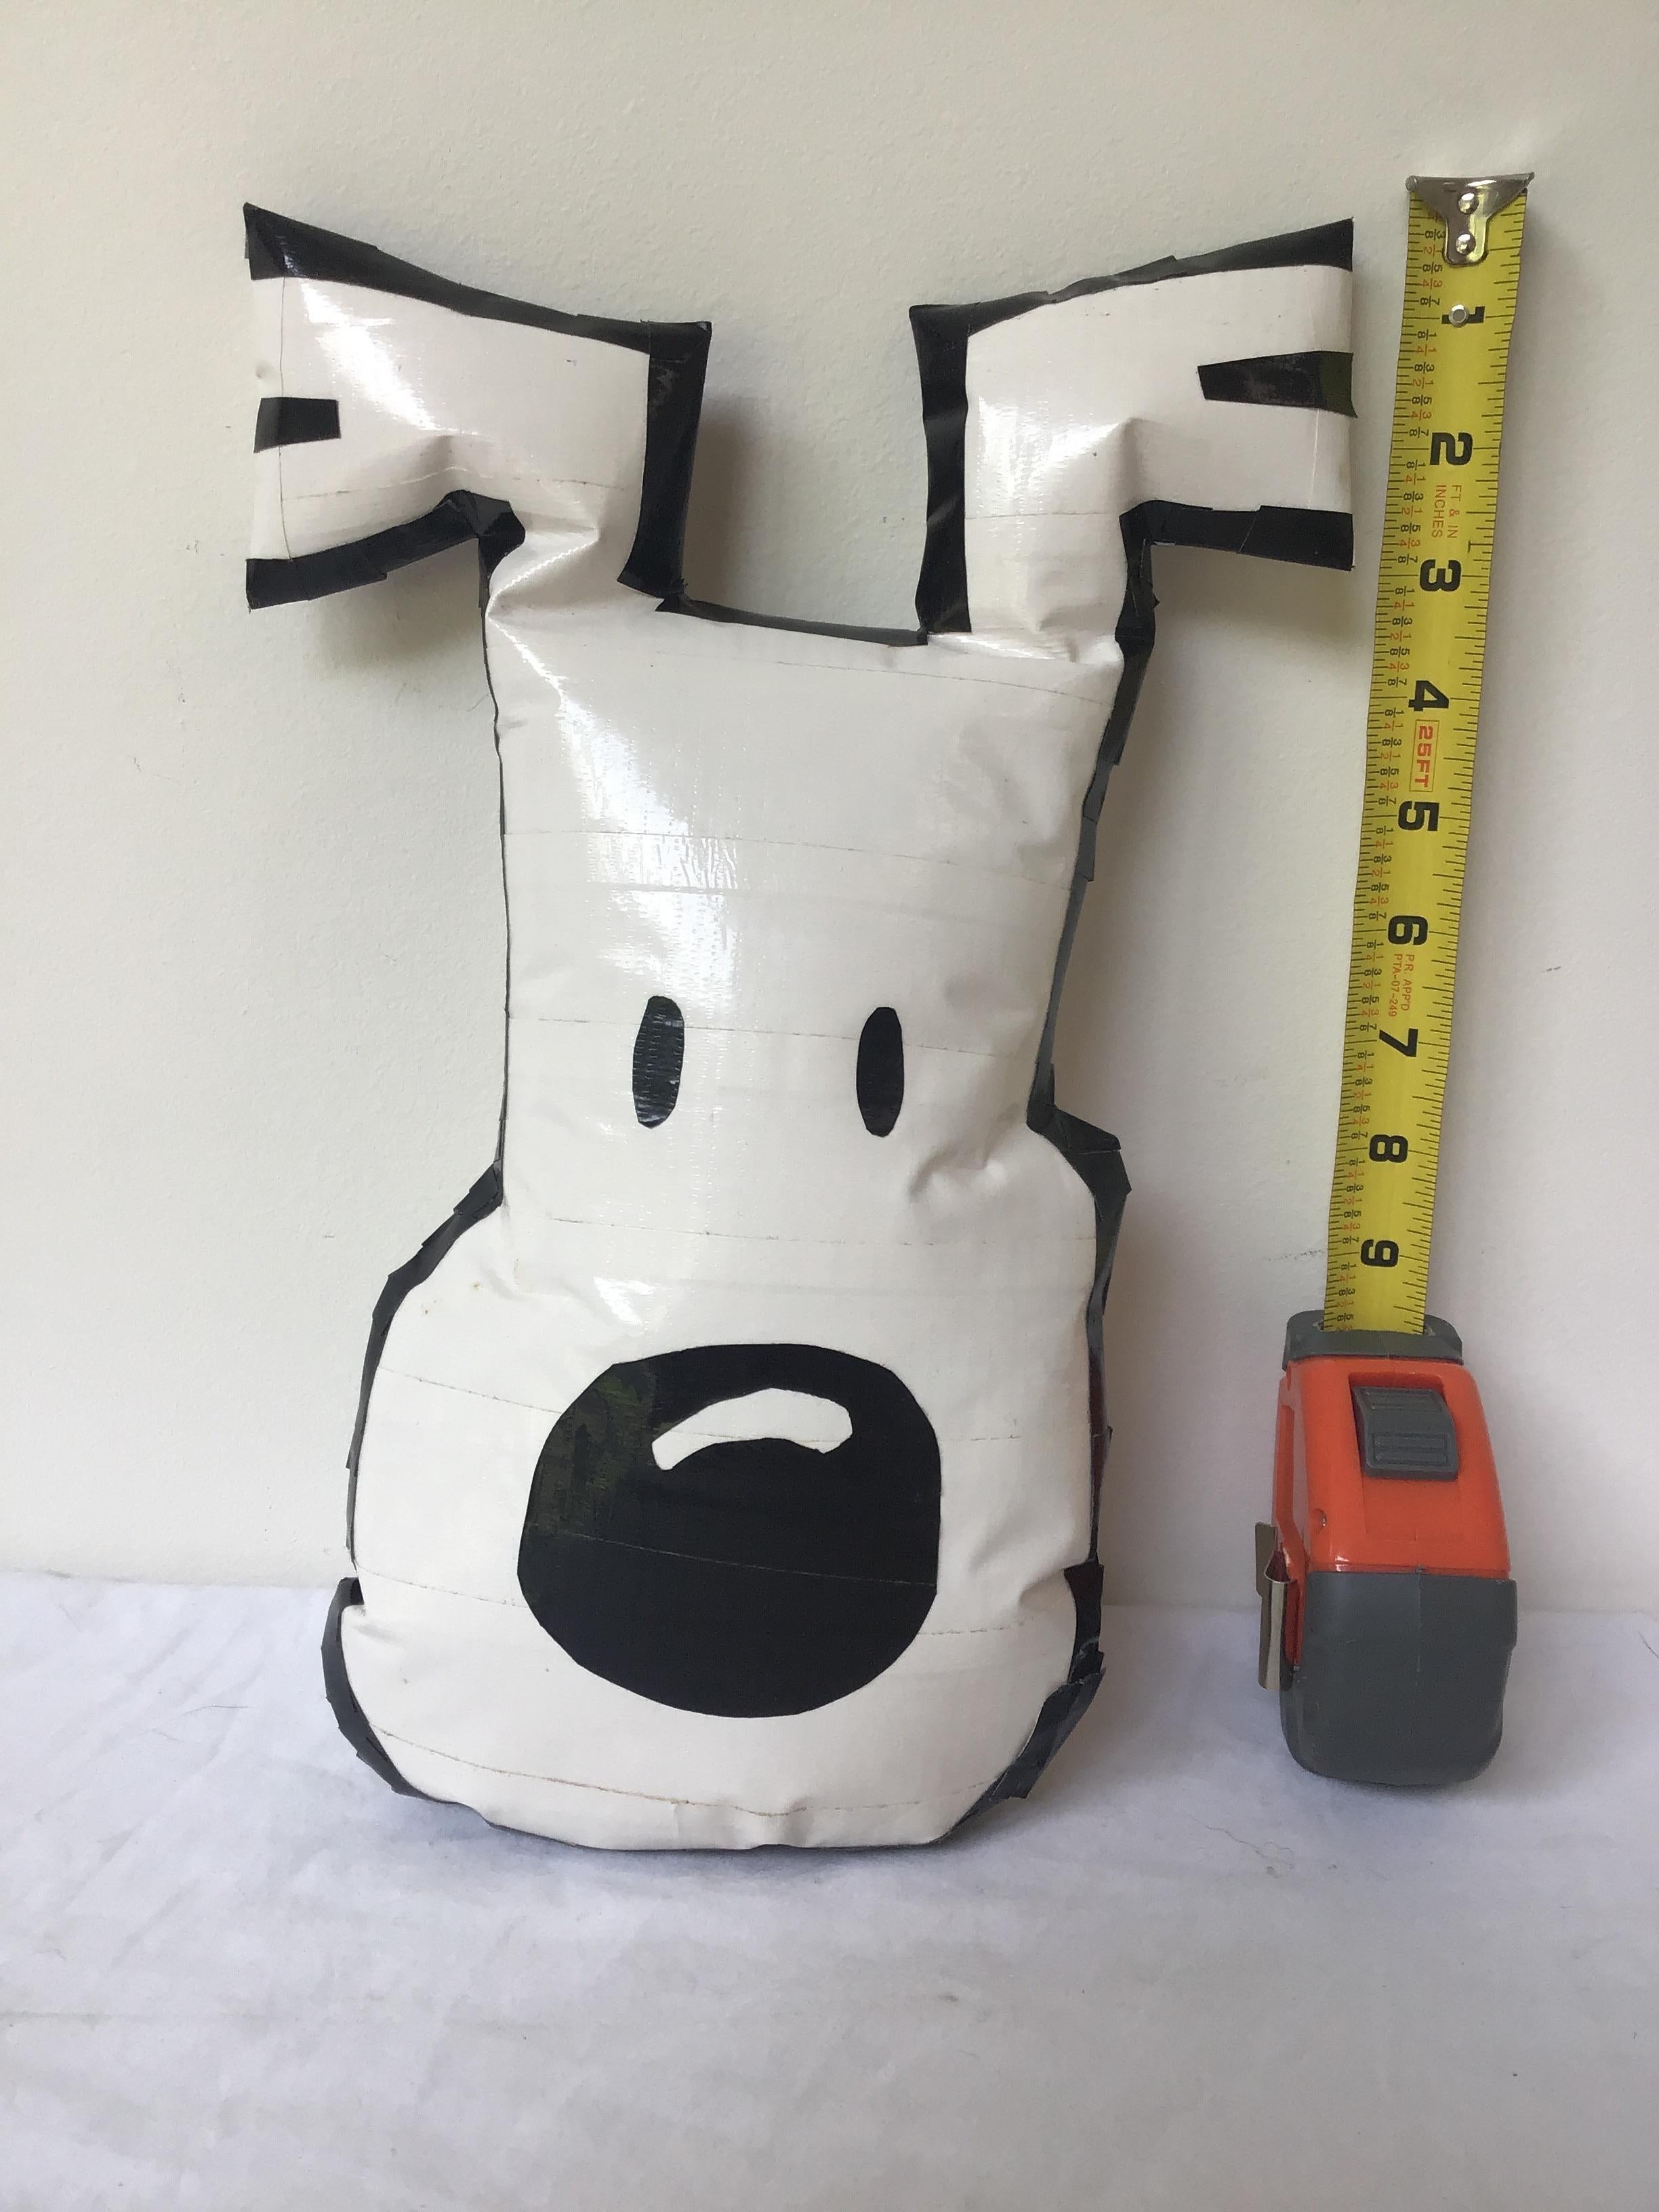 Dog face made by a Japanese artist from duct tape in 2013.